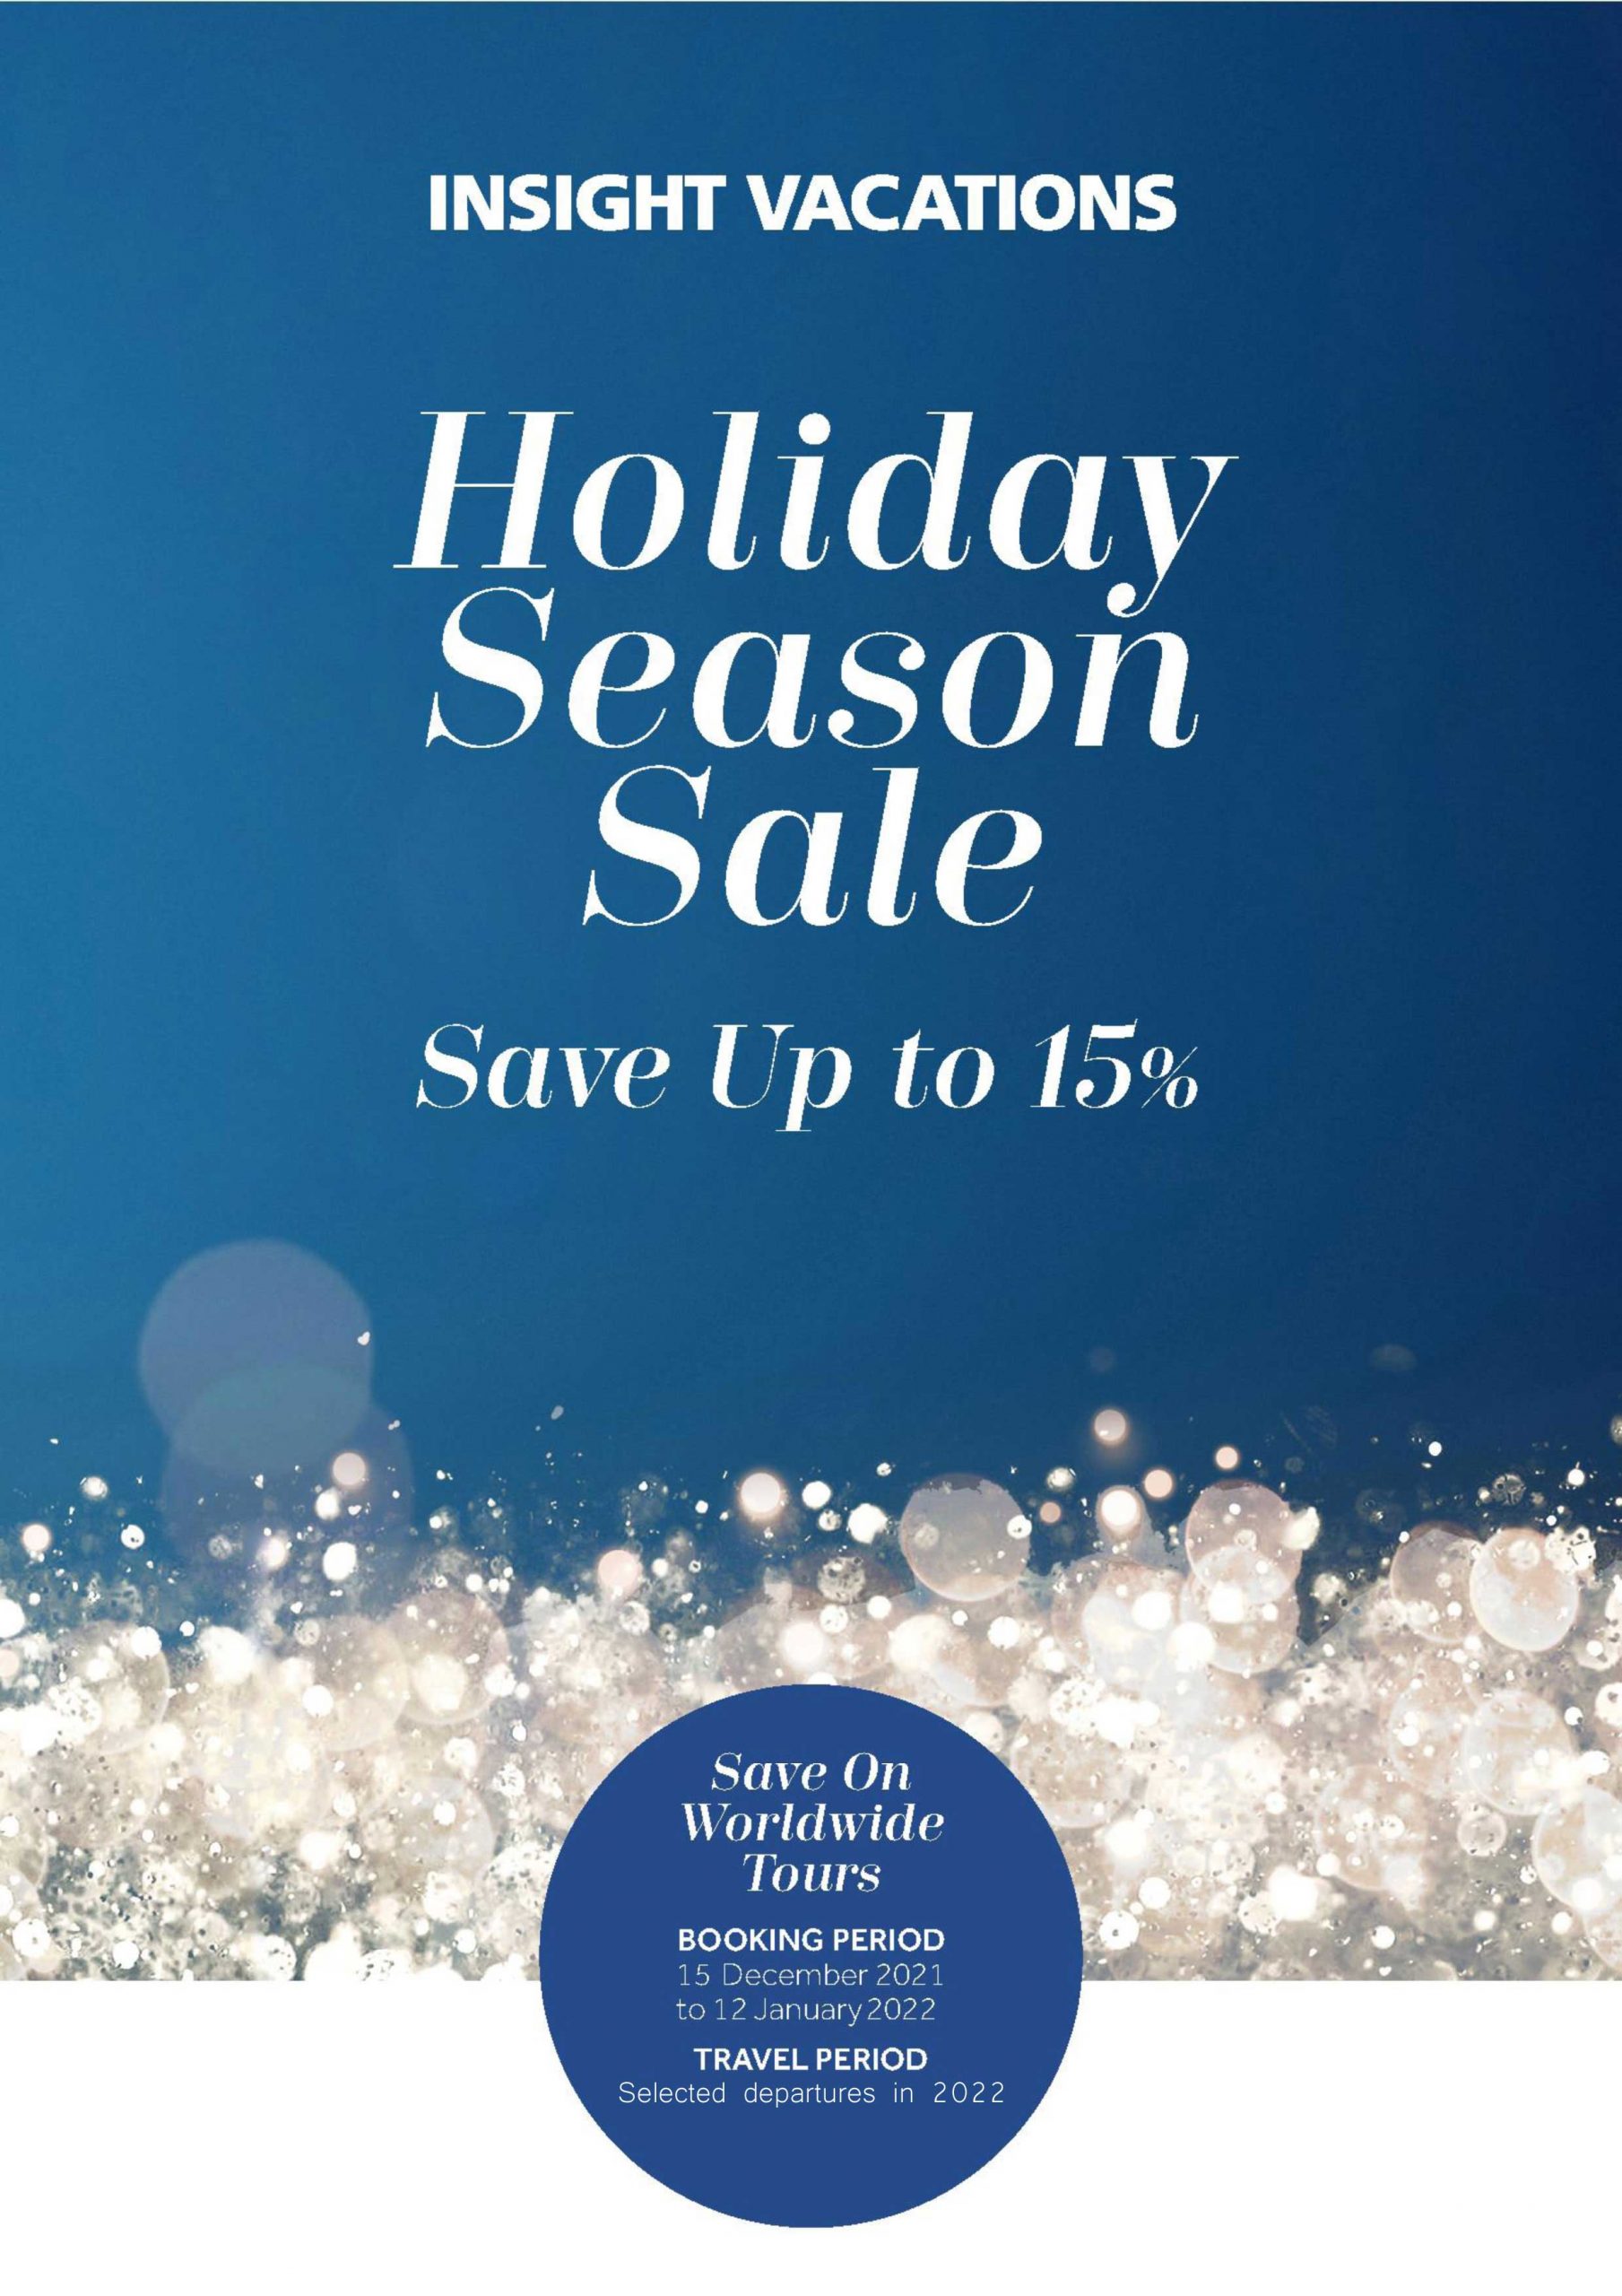 Insight Vacations IV Holiday Season Sale Flyer MY 1 Edited scaled